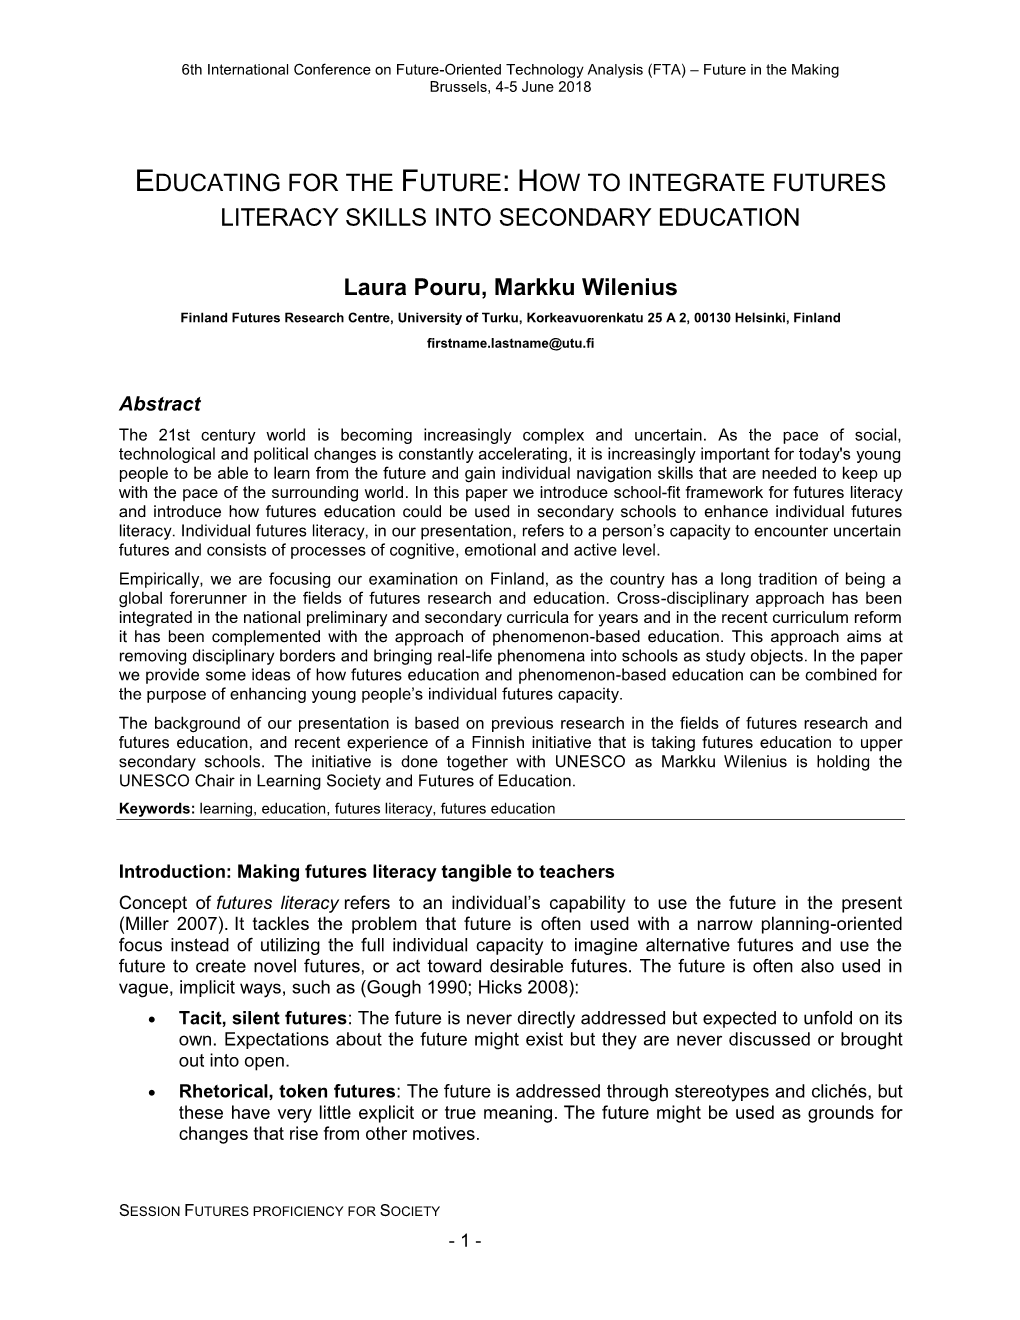 How to Integrate Futures Literacy Skills Into Secondary Education